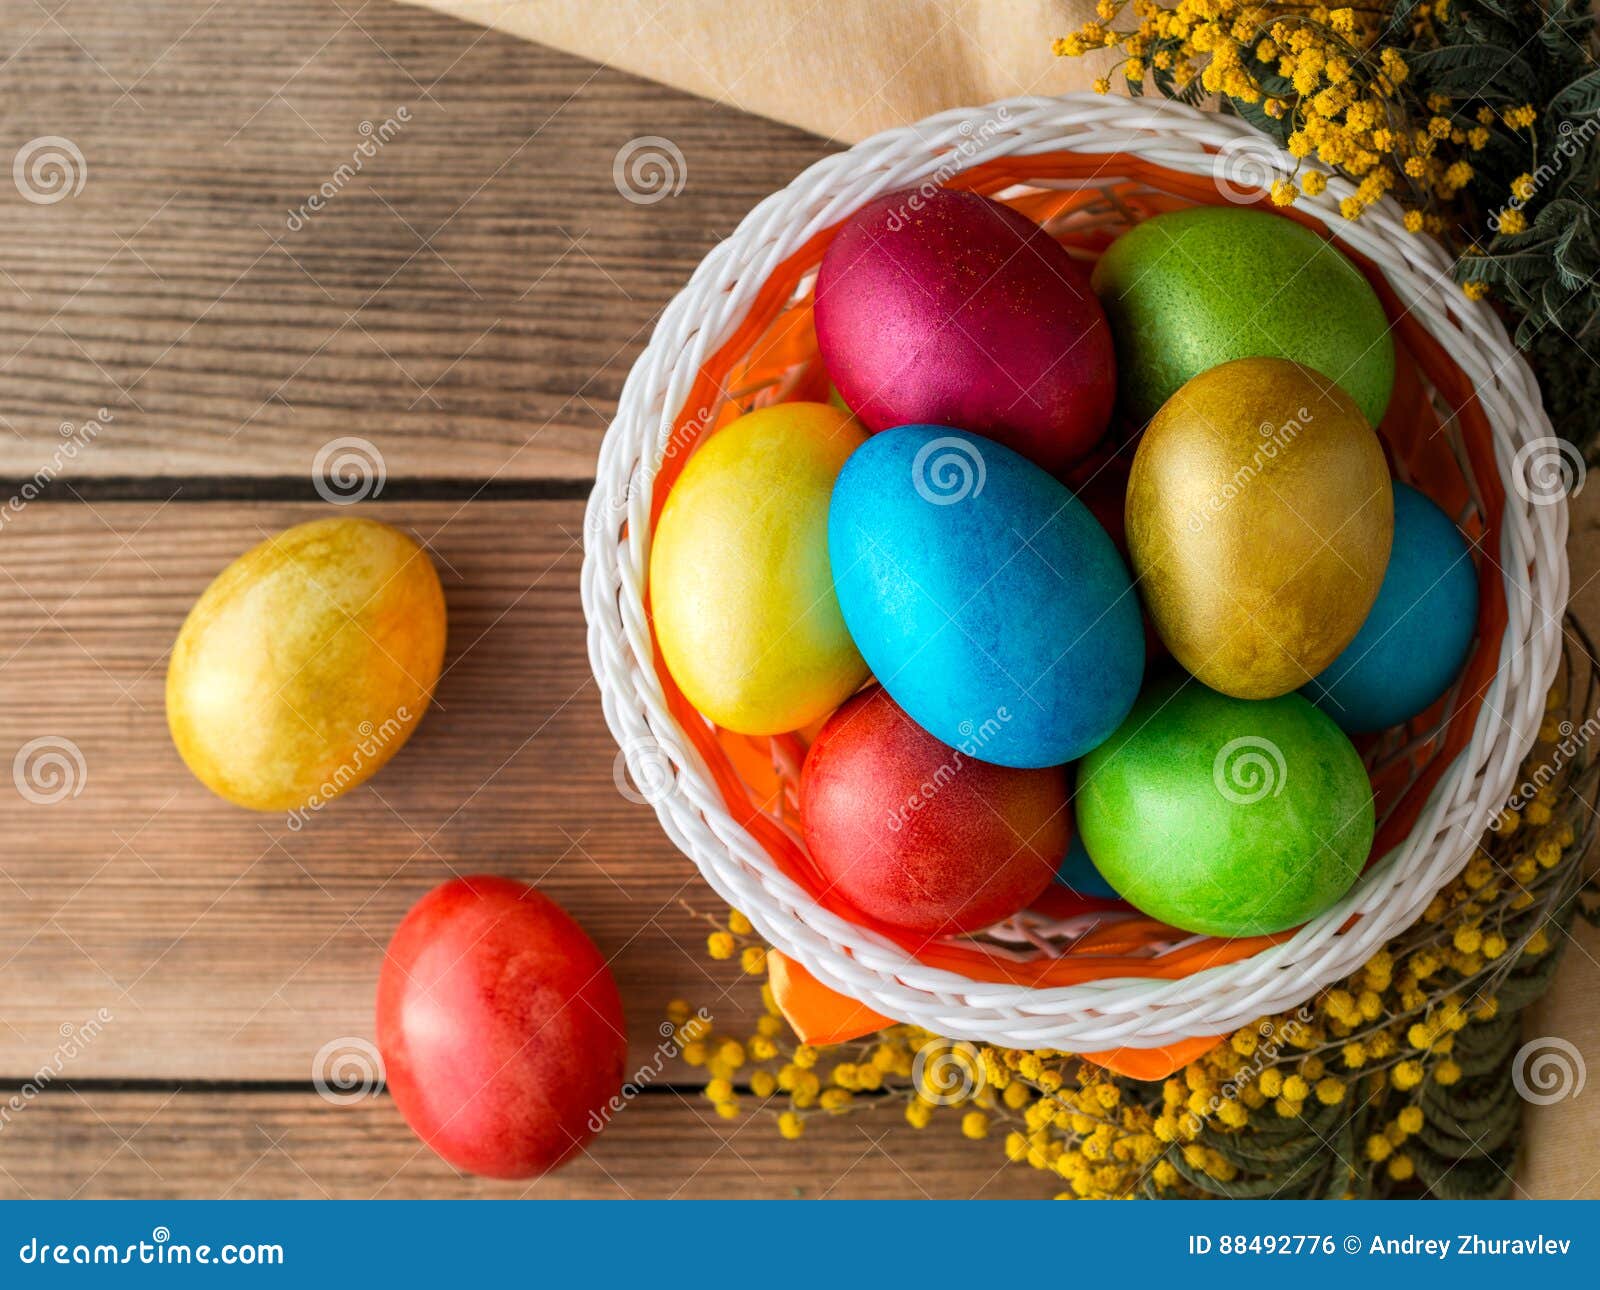 Colorful Painted Easter Eggs in Basket and Mimosa Flowers on Rustic ...